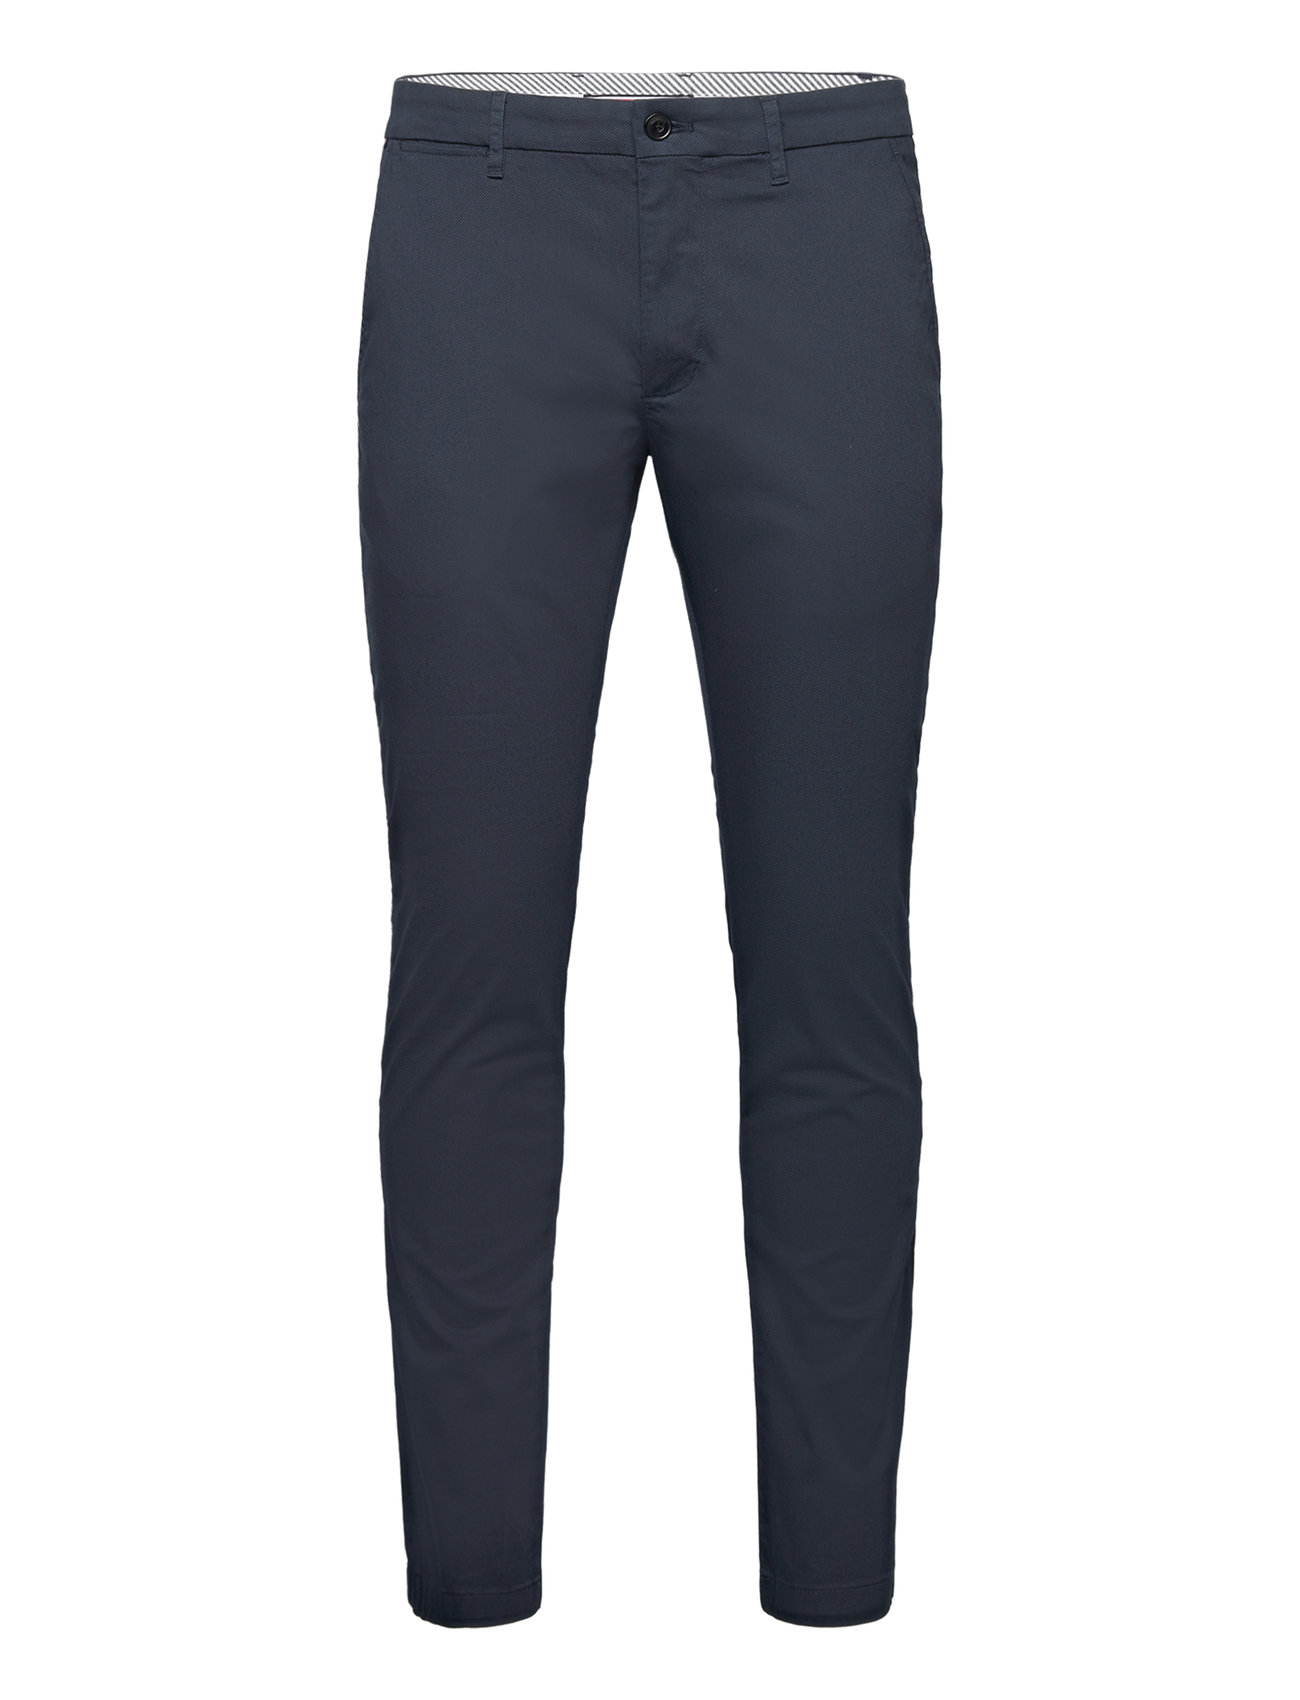 Bleecker Chino Printed Structure Bottoms Trousers Chinos Navy Tommy Hilfiger